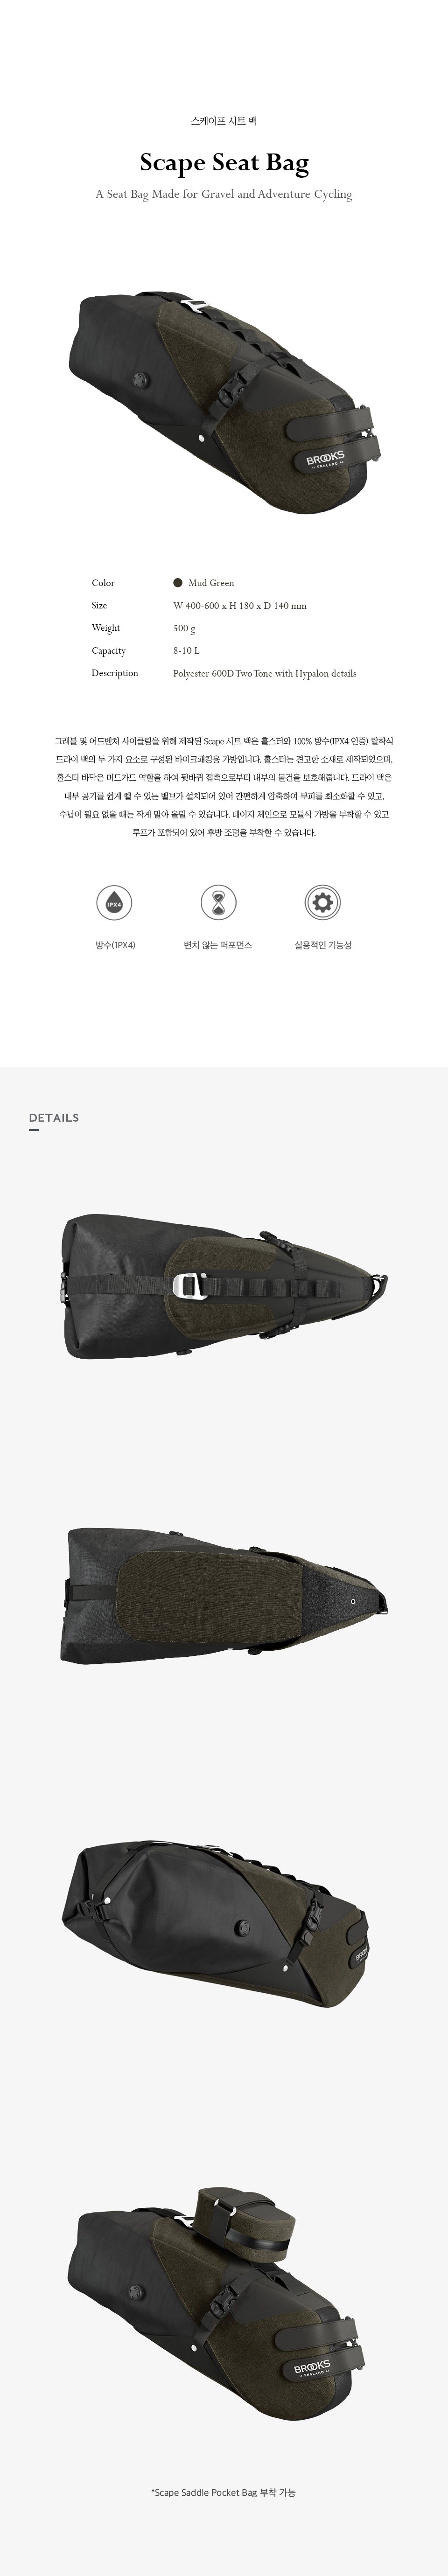 [BS]_scape_collection_seat_bag_192913.jpg